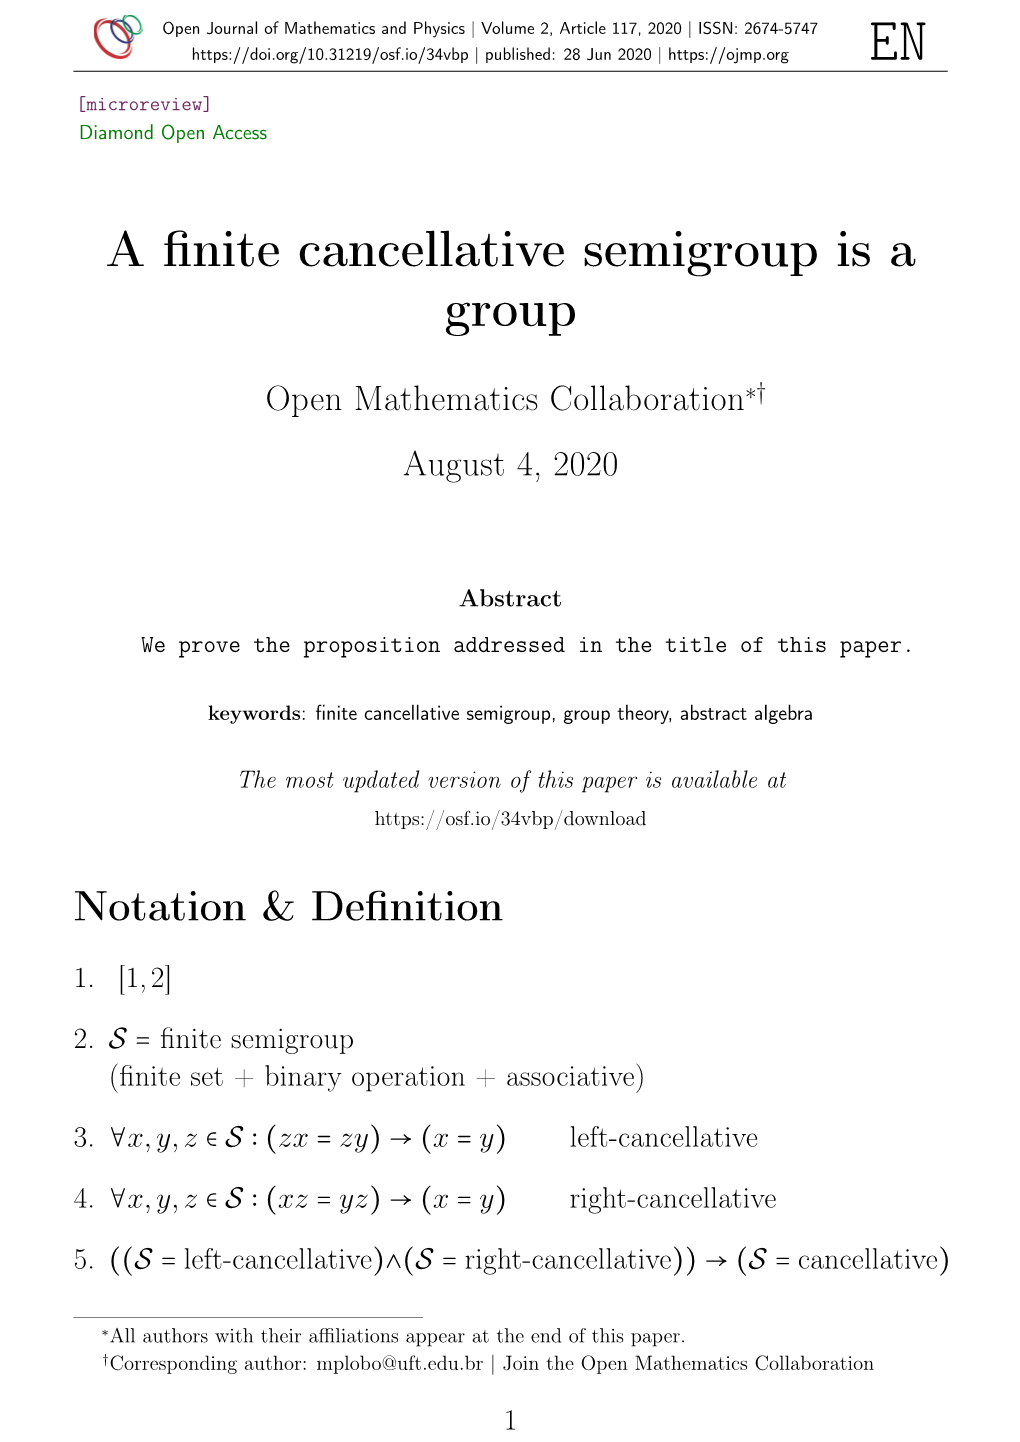 A Finite Cancellative Semigroup Is a Group.” OSF Preprints, 28 June 2020